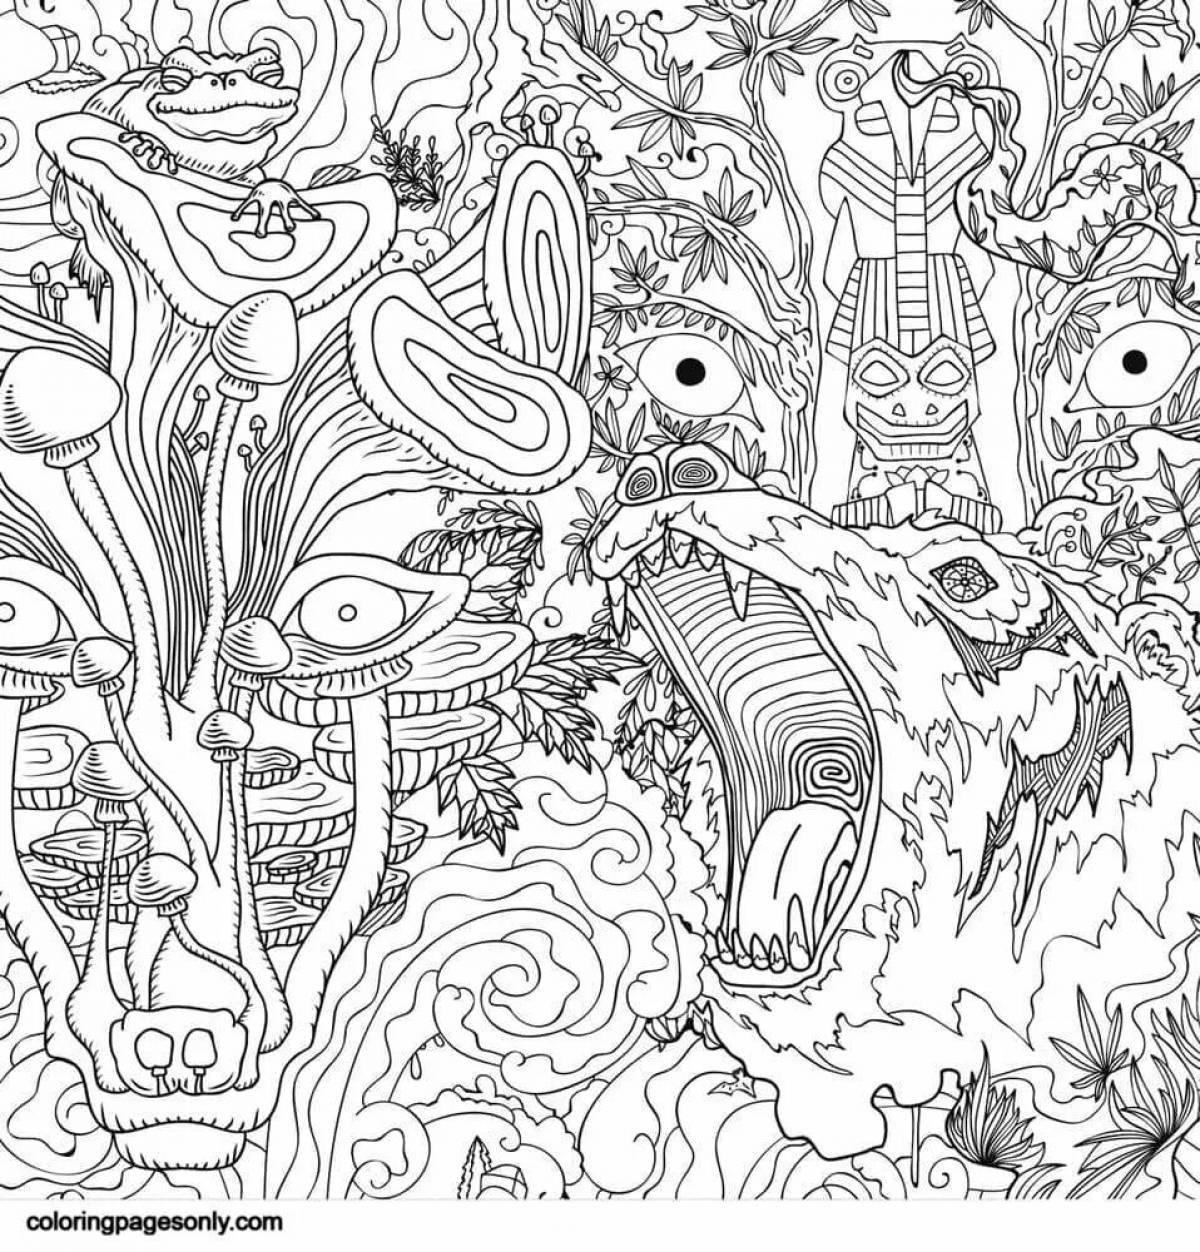 Exciting psychedelic coloring book